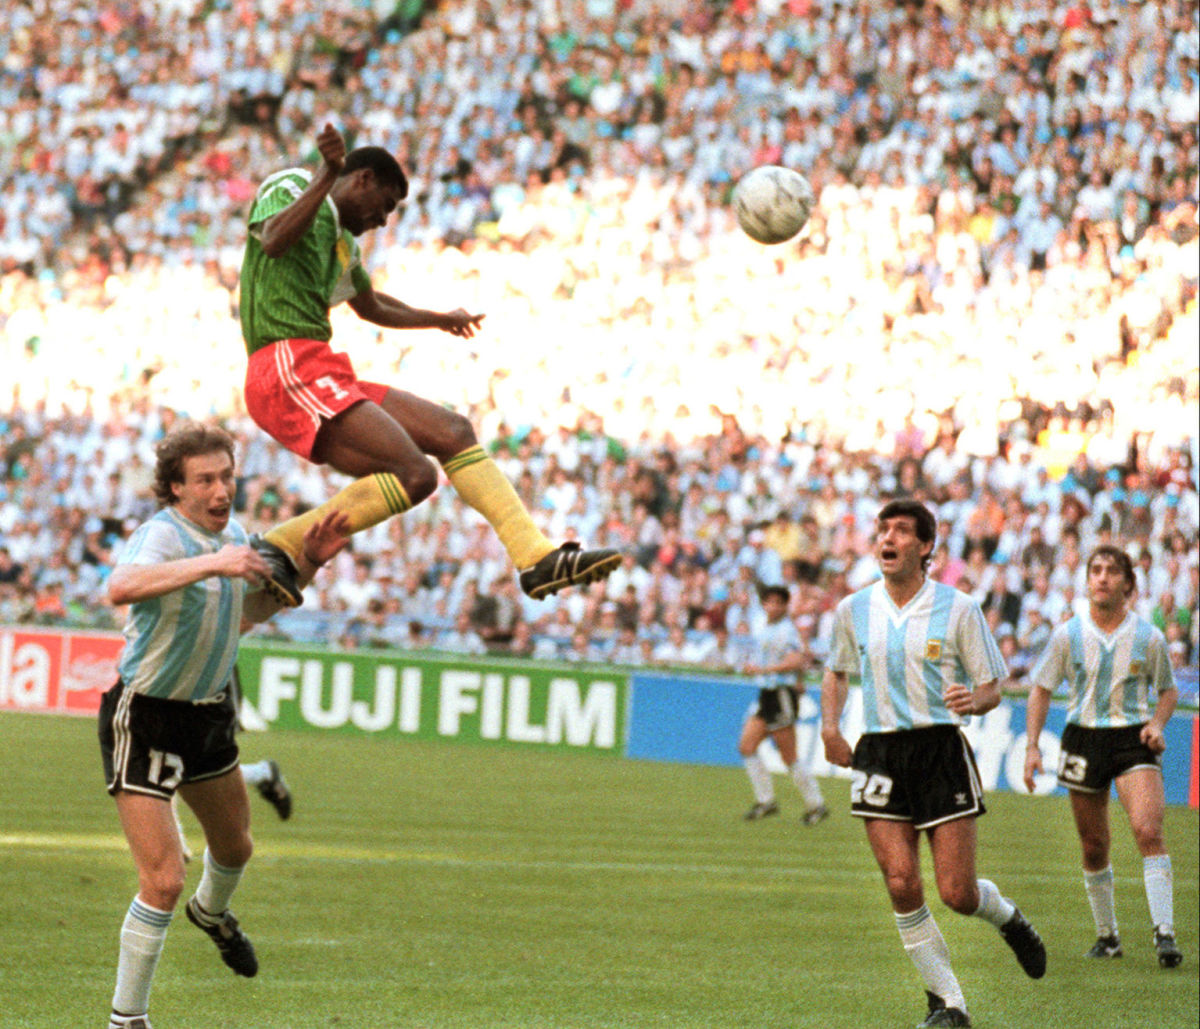 Forward Francois Omam-Biyick from Cameroon scores on a header as Argentinian defenders Nestor Lorenzo (L) and Juan Simon look on 08 June 1990 in Milan during the World Cup opening match between Cameroon and Argentina. Despite two expulsions, Cameroon upset the defending World champions 1-0. AFP PHOTO (Photo credit should read STAFF/AFP/Getty Images)